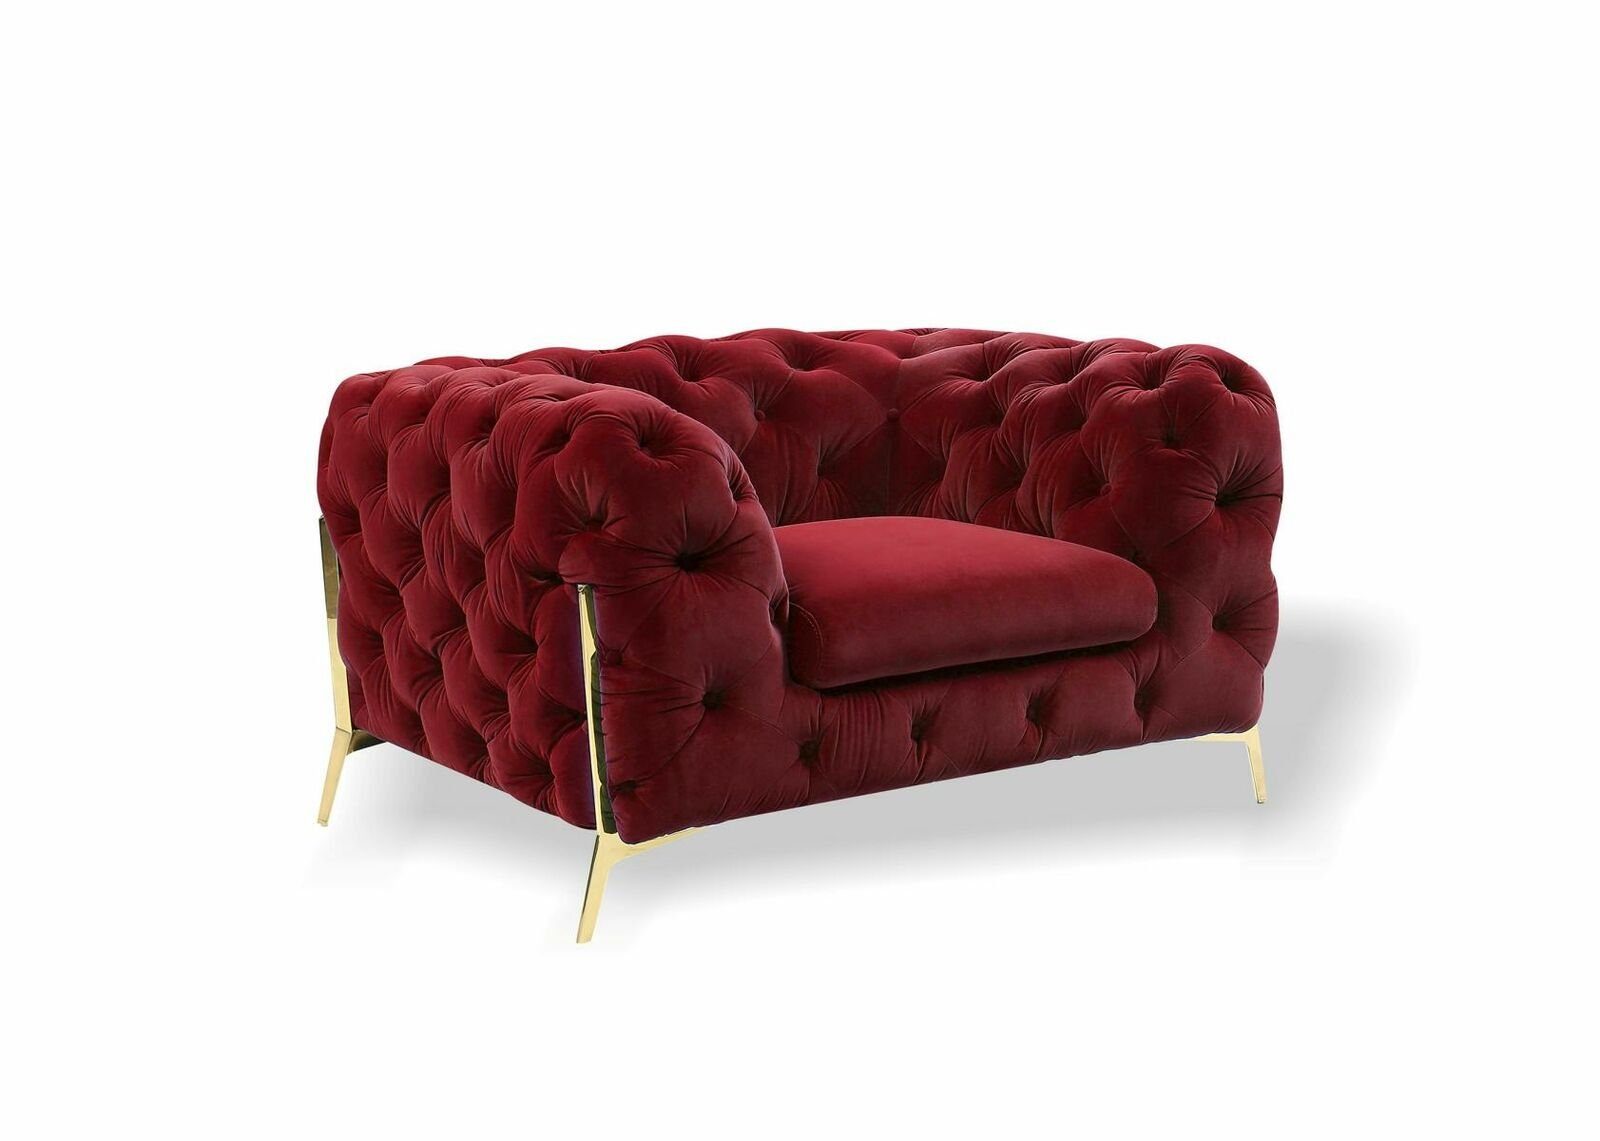 Sofa Chesterfield Couch (Sessel), Ohrensessel Rot Sitzer 1 Made Sessel in JVmoebel Couch Europe Polster Ohrensessel